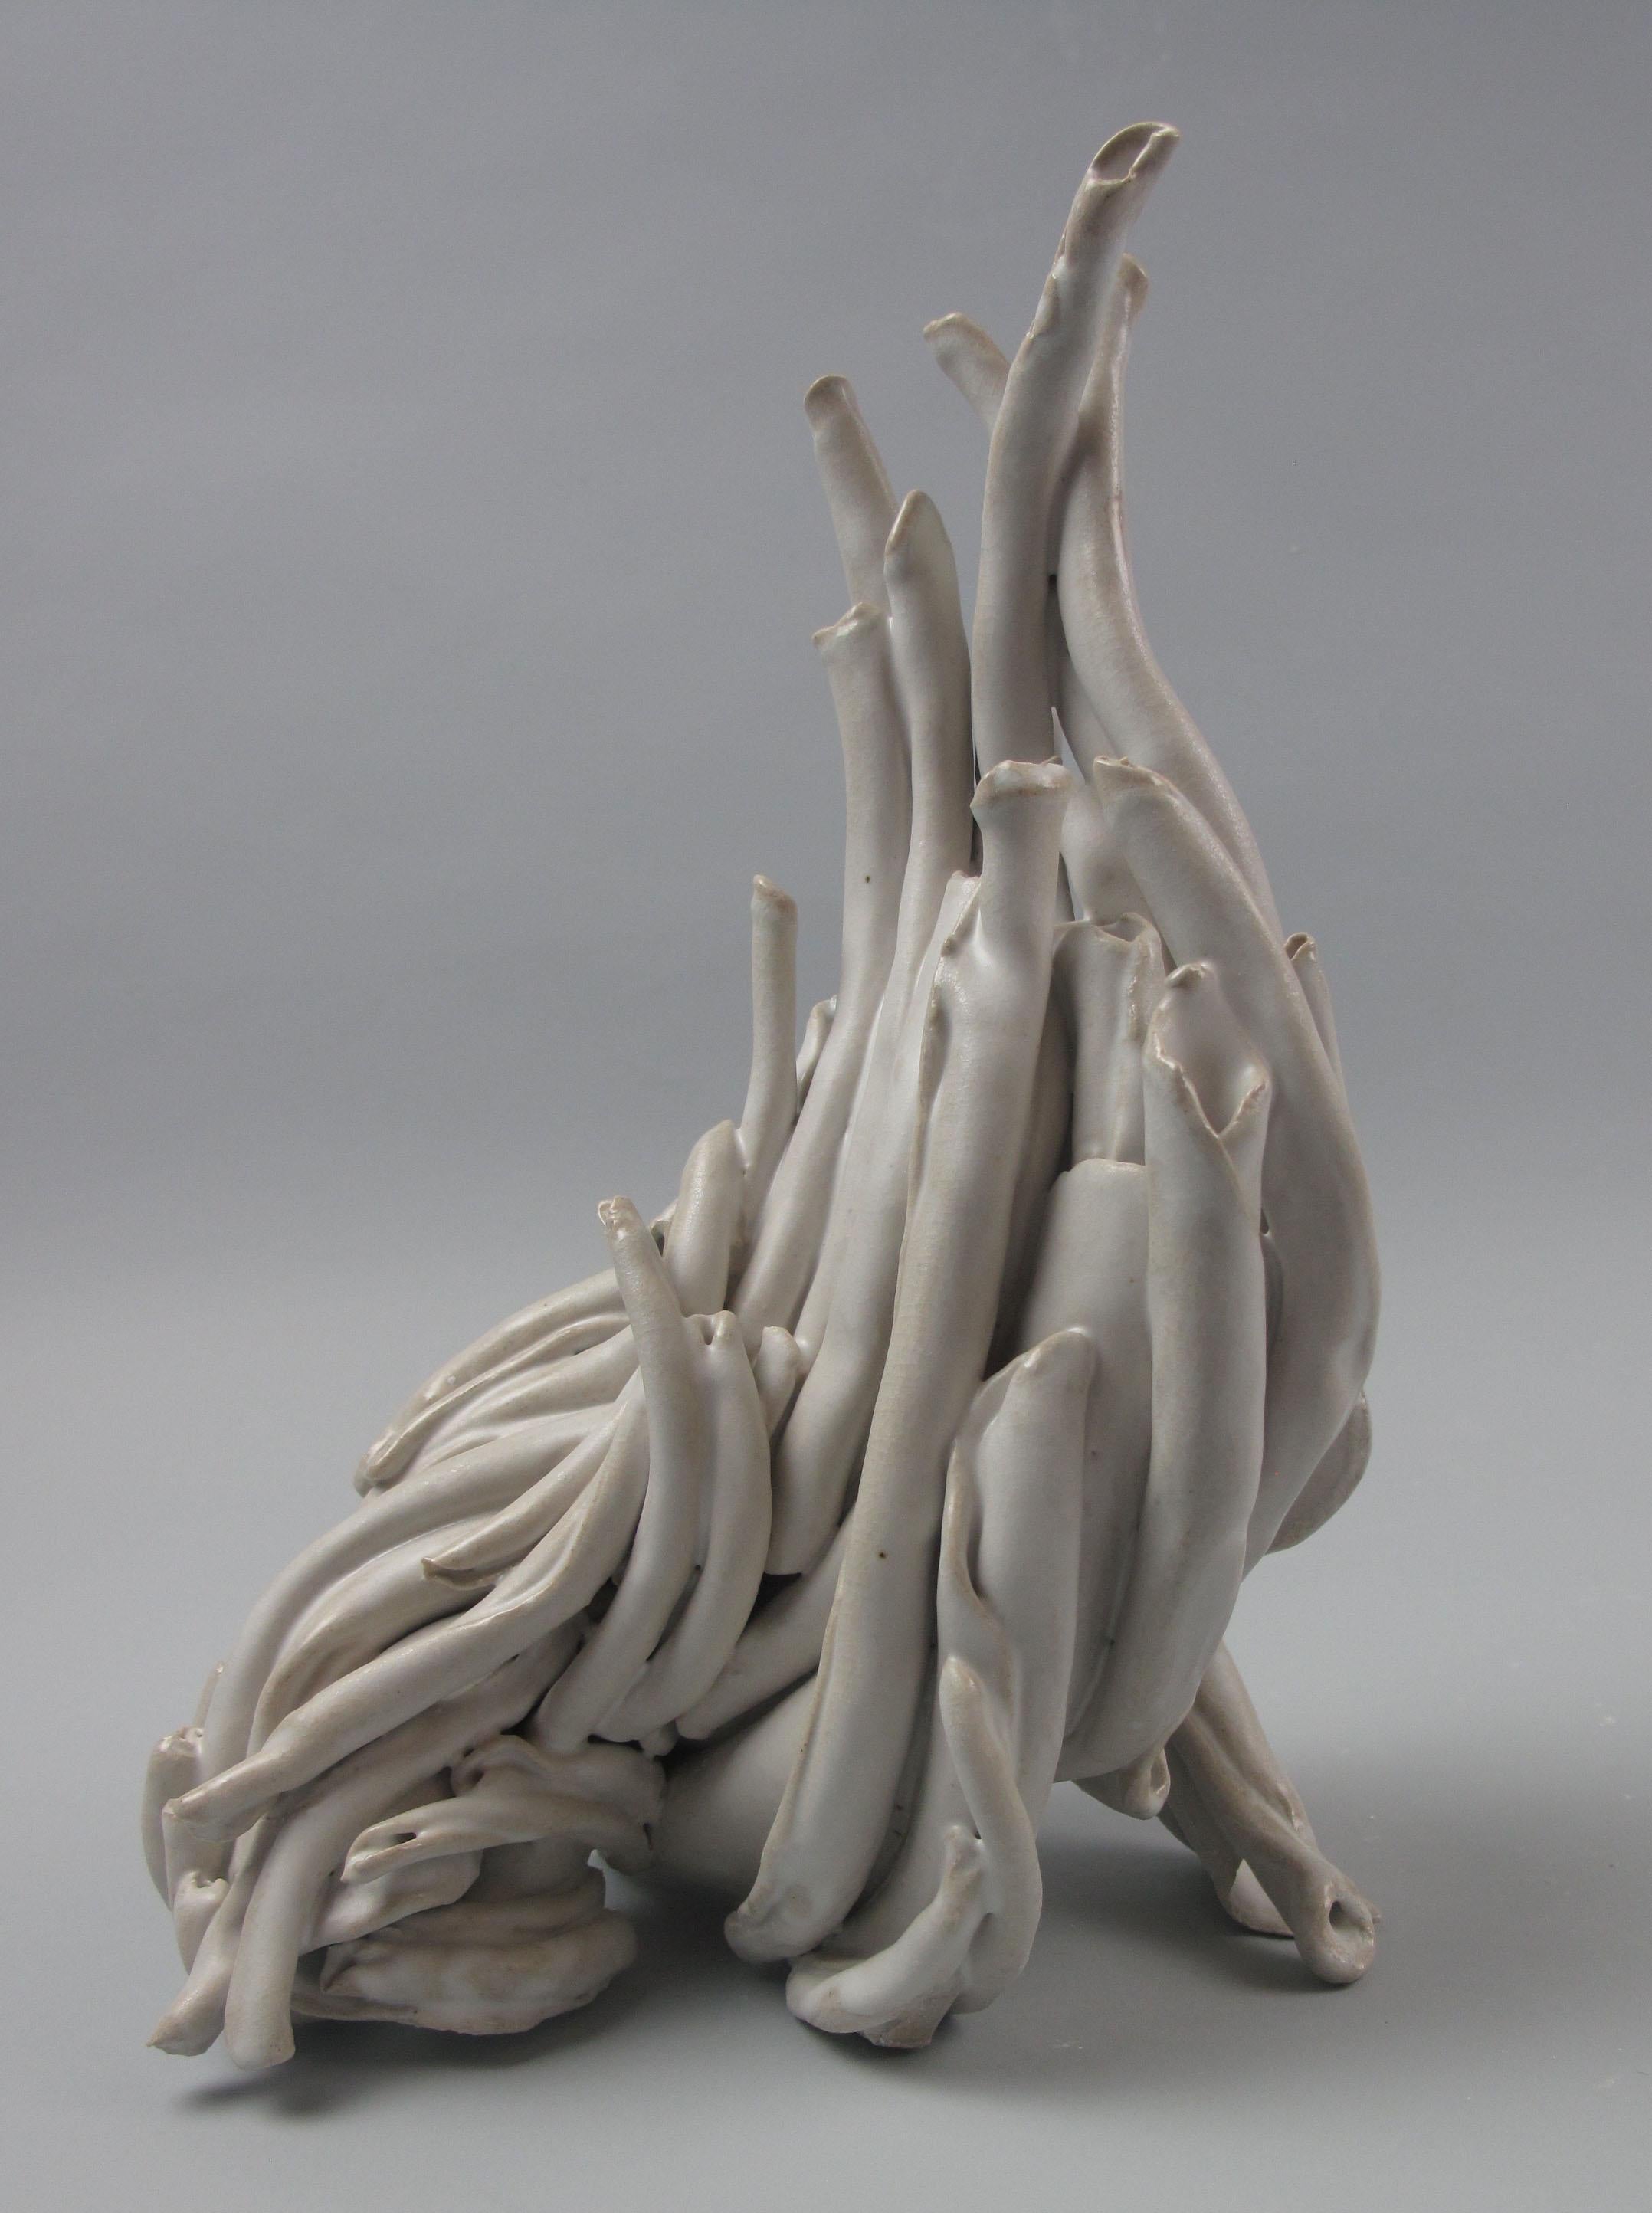 Sara Fine-Wilsons ”Turn” is a gestural 10.5 x 8 x 6.5 inch ceramic sculpture in cream and white. In this graceful and evocative sculpture individual twisted elements are assembled and layered in glaze. This process emphasizes the smooth fluid